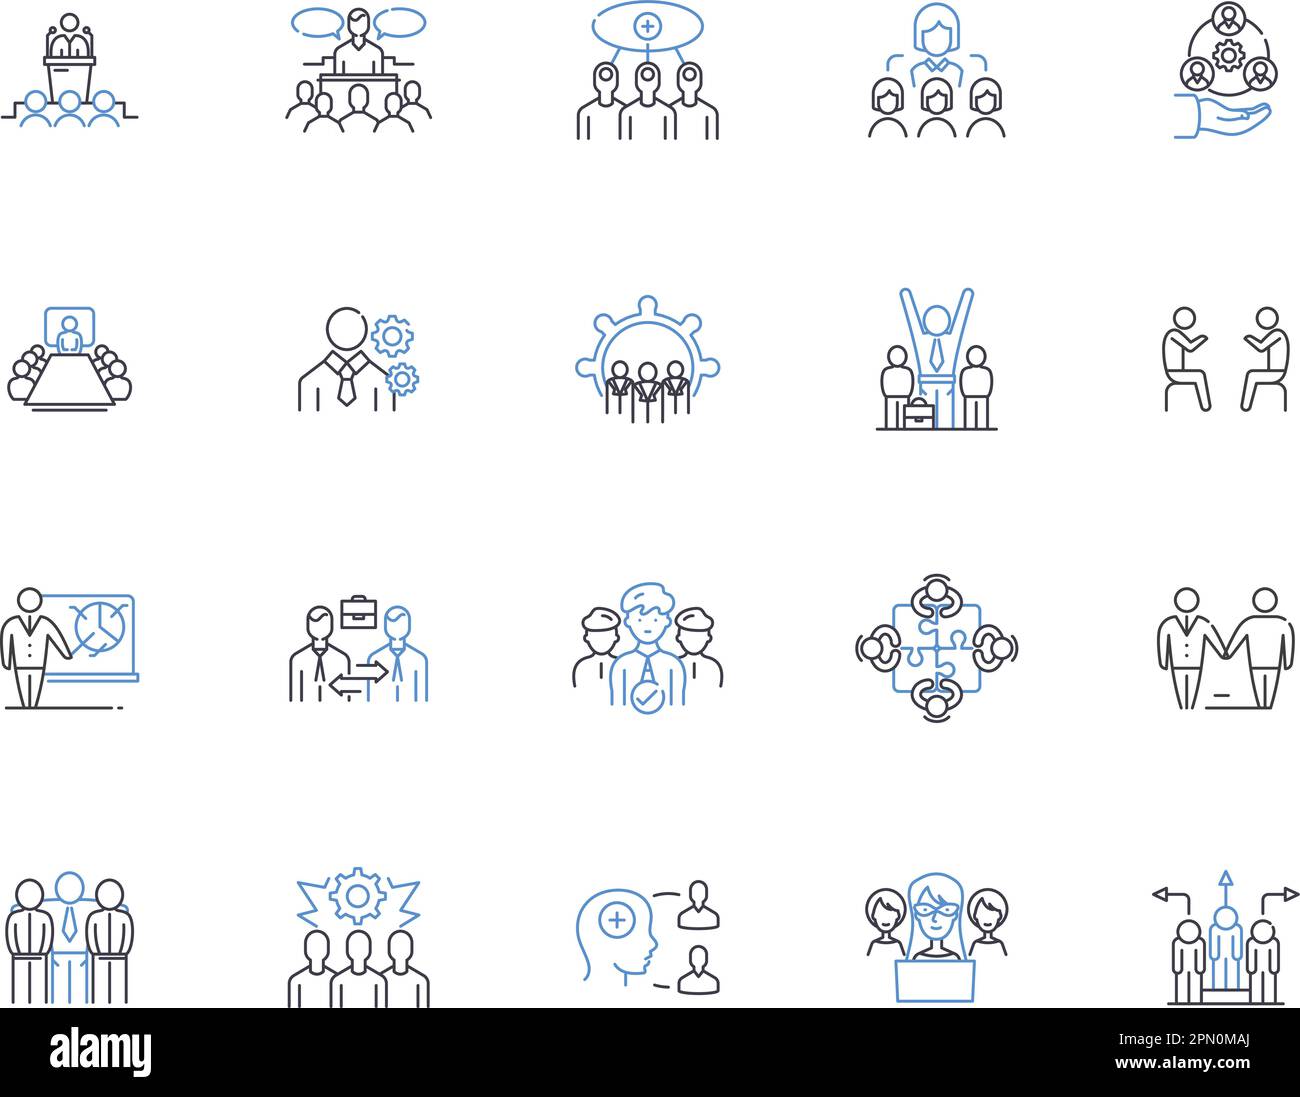 Group people outline icons collection. Group, People, Collective, Organization, Congregation, Community, Clique vector and illustration concept set Stock Vector